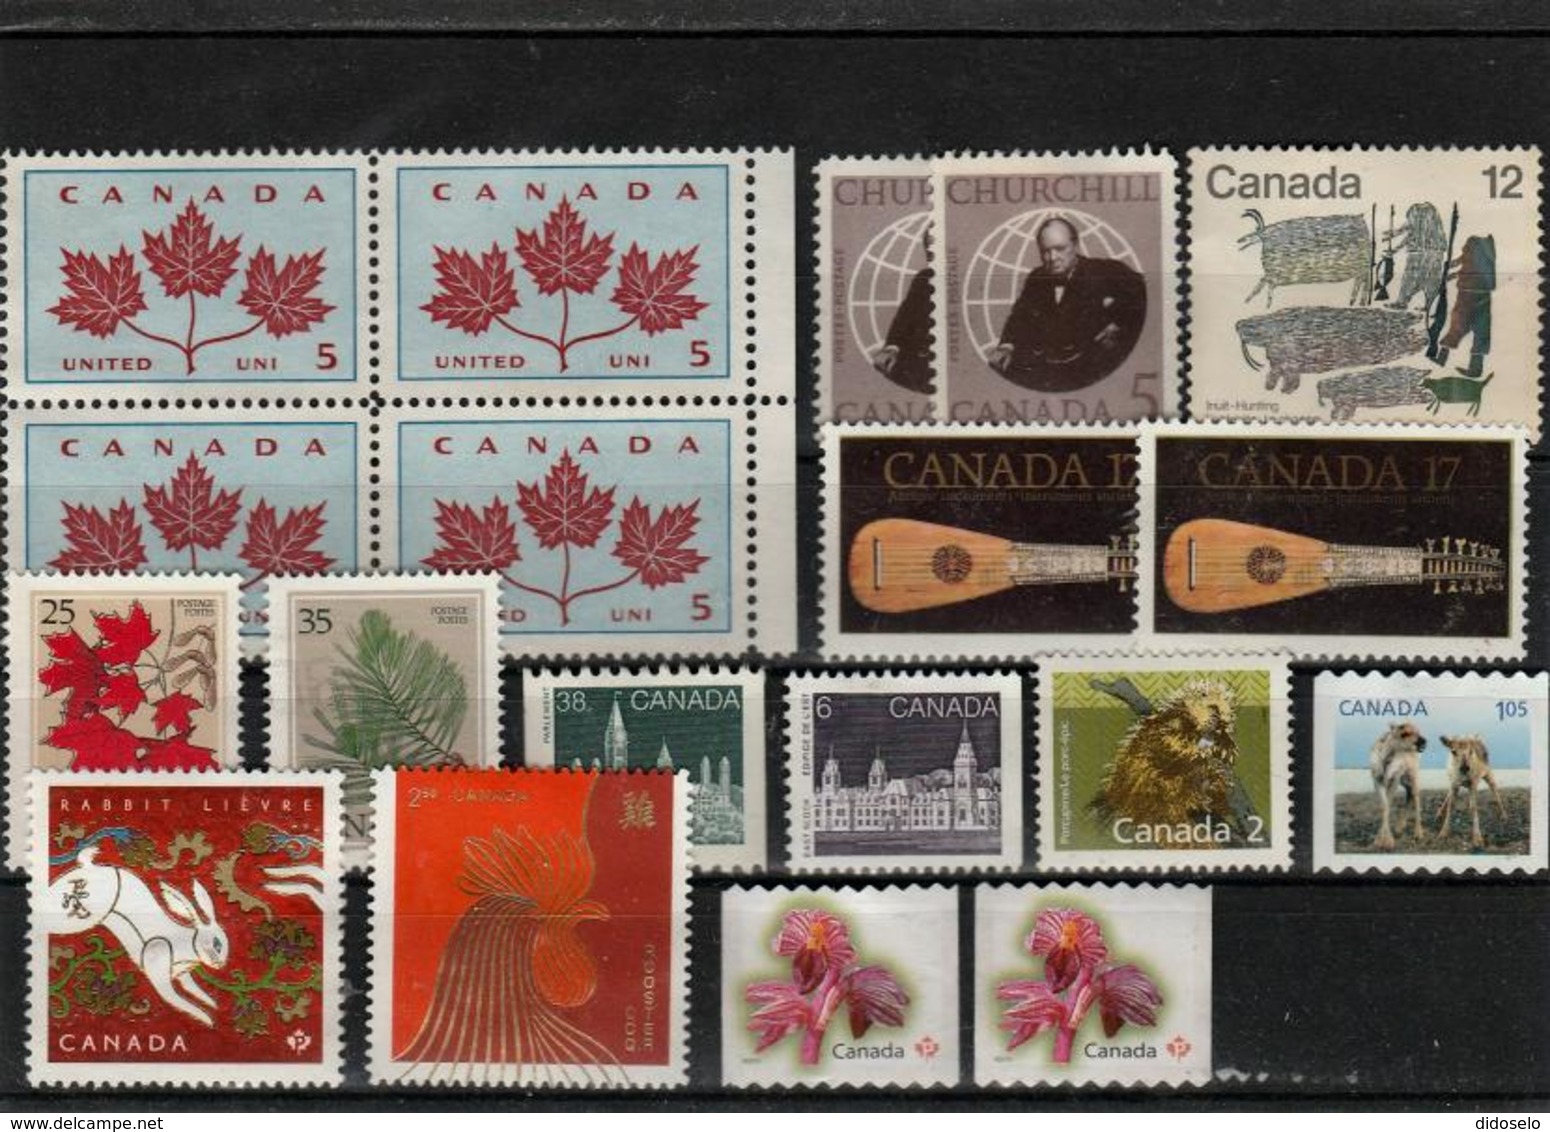 CANADA -LOT OF NOT CANSELED STAMPS - Sammlungen